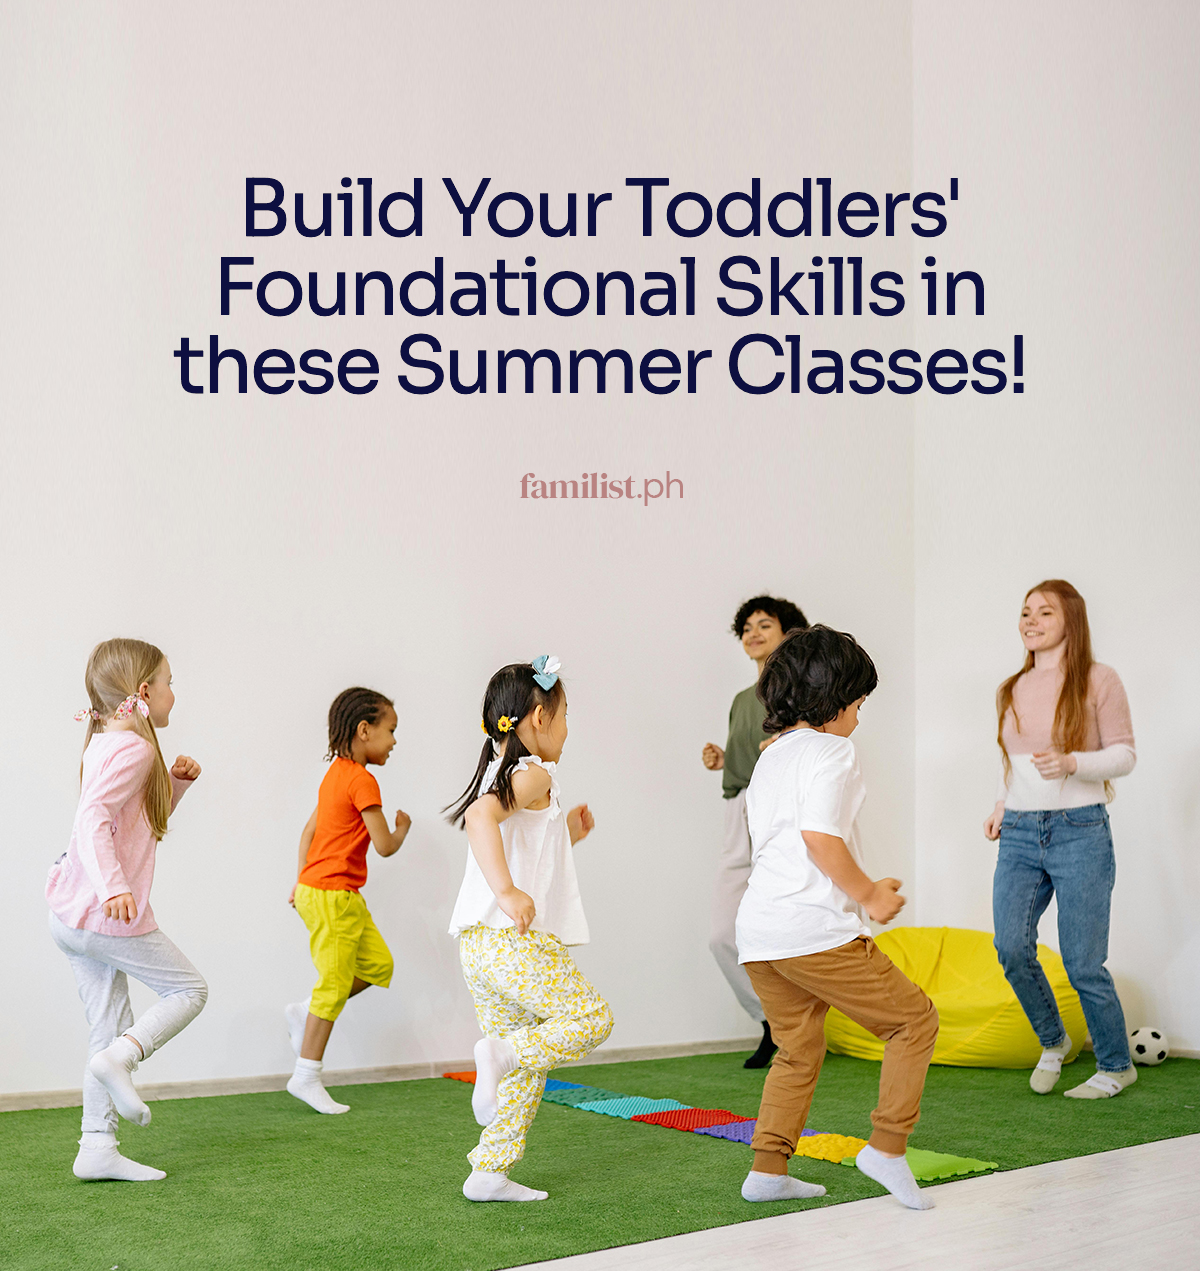 Build Your Toddlers' Foundational Skills in these Summer Classes!